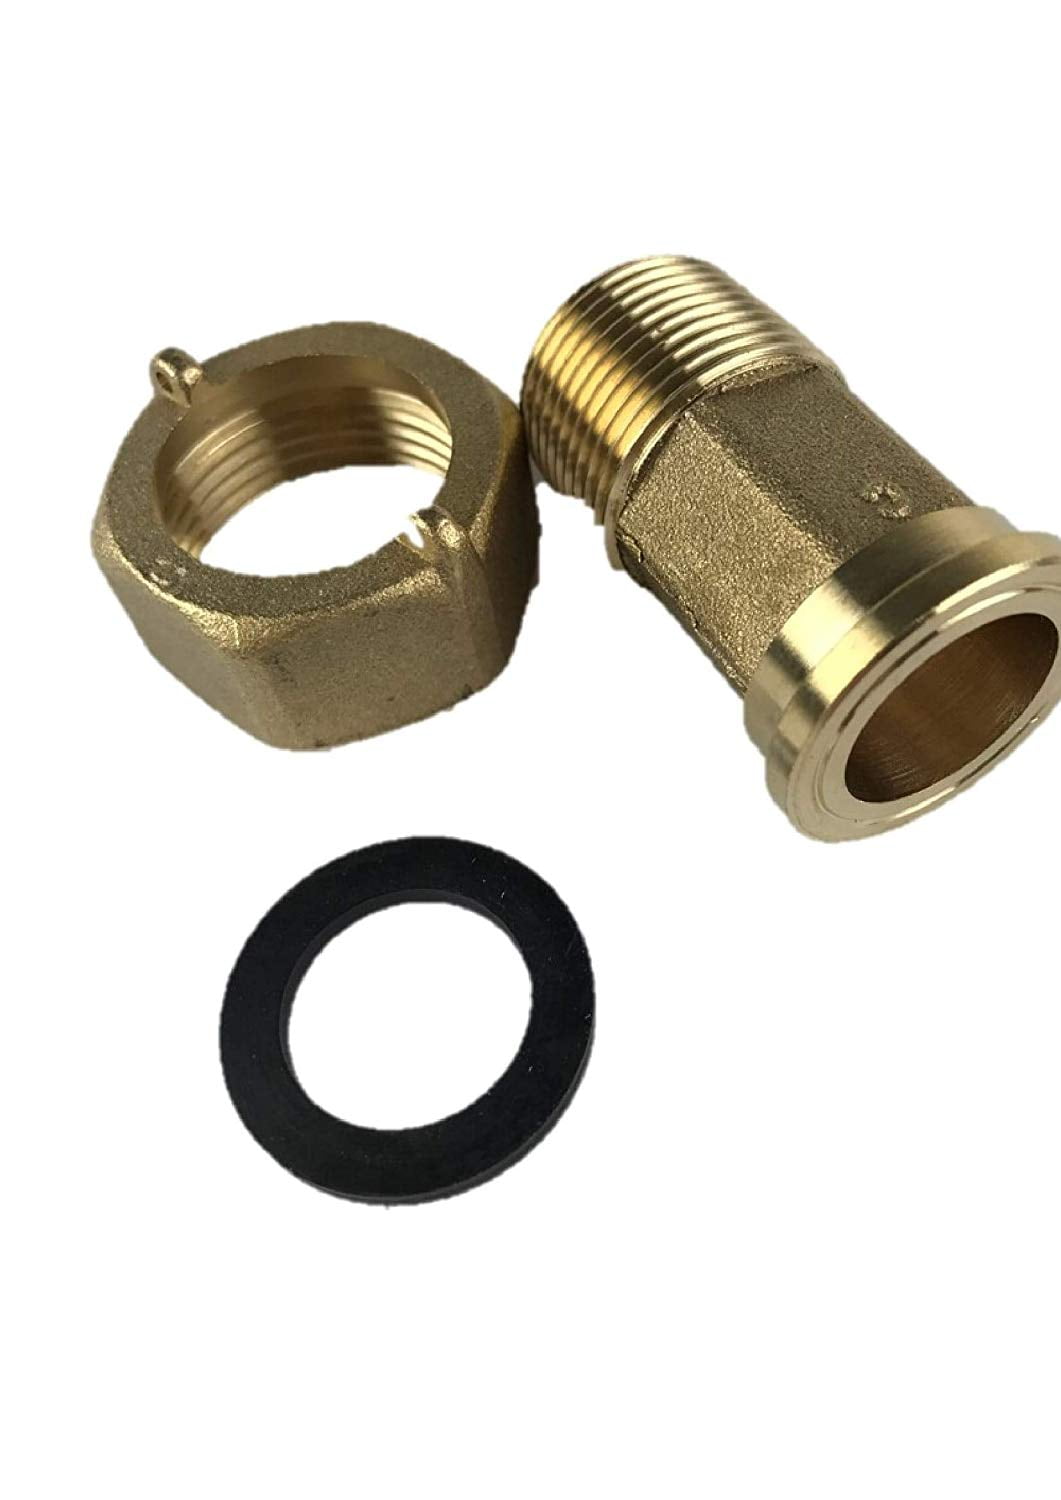 3/4" Lead Free Brass Water Meter coupling Set of 2 for 5/8 x 3/4 